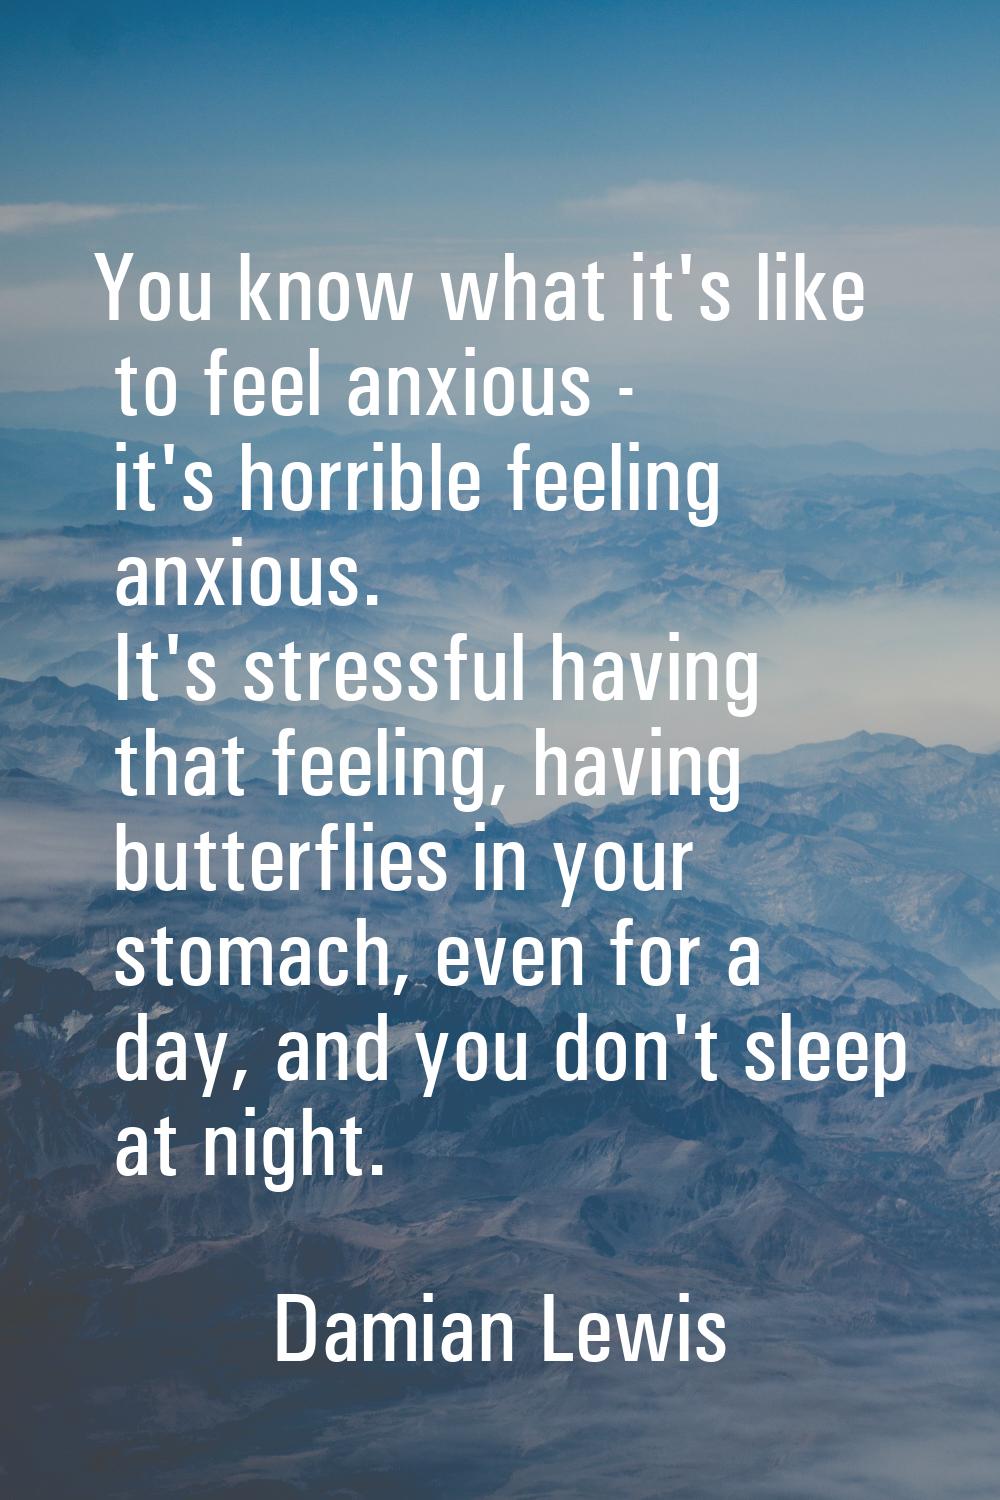 You know what it's like to feel anxious - it's horrible feeling anxious. It's stressful having that